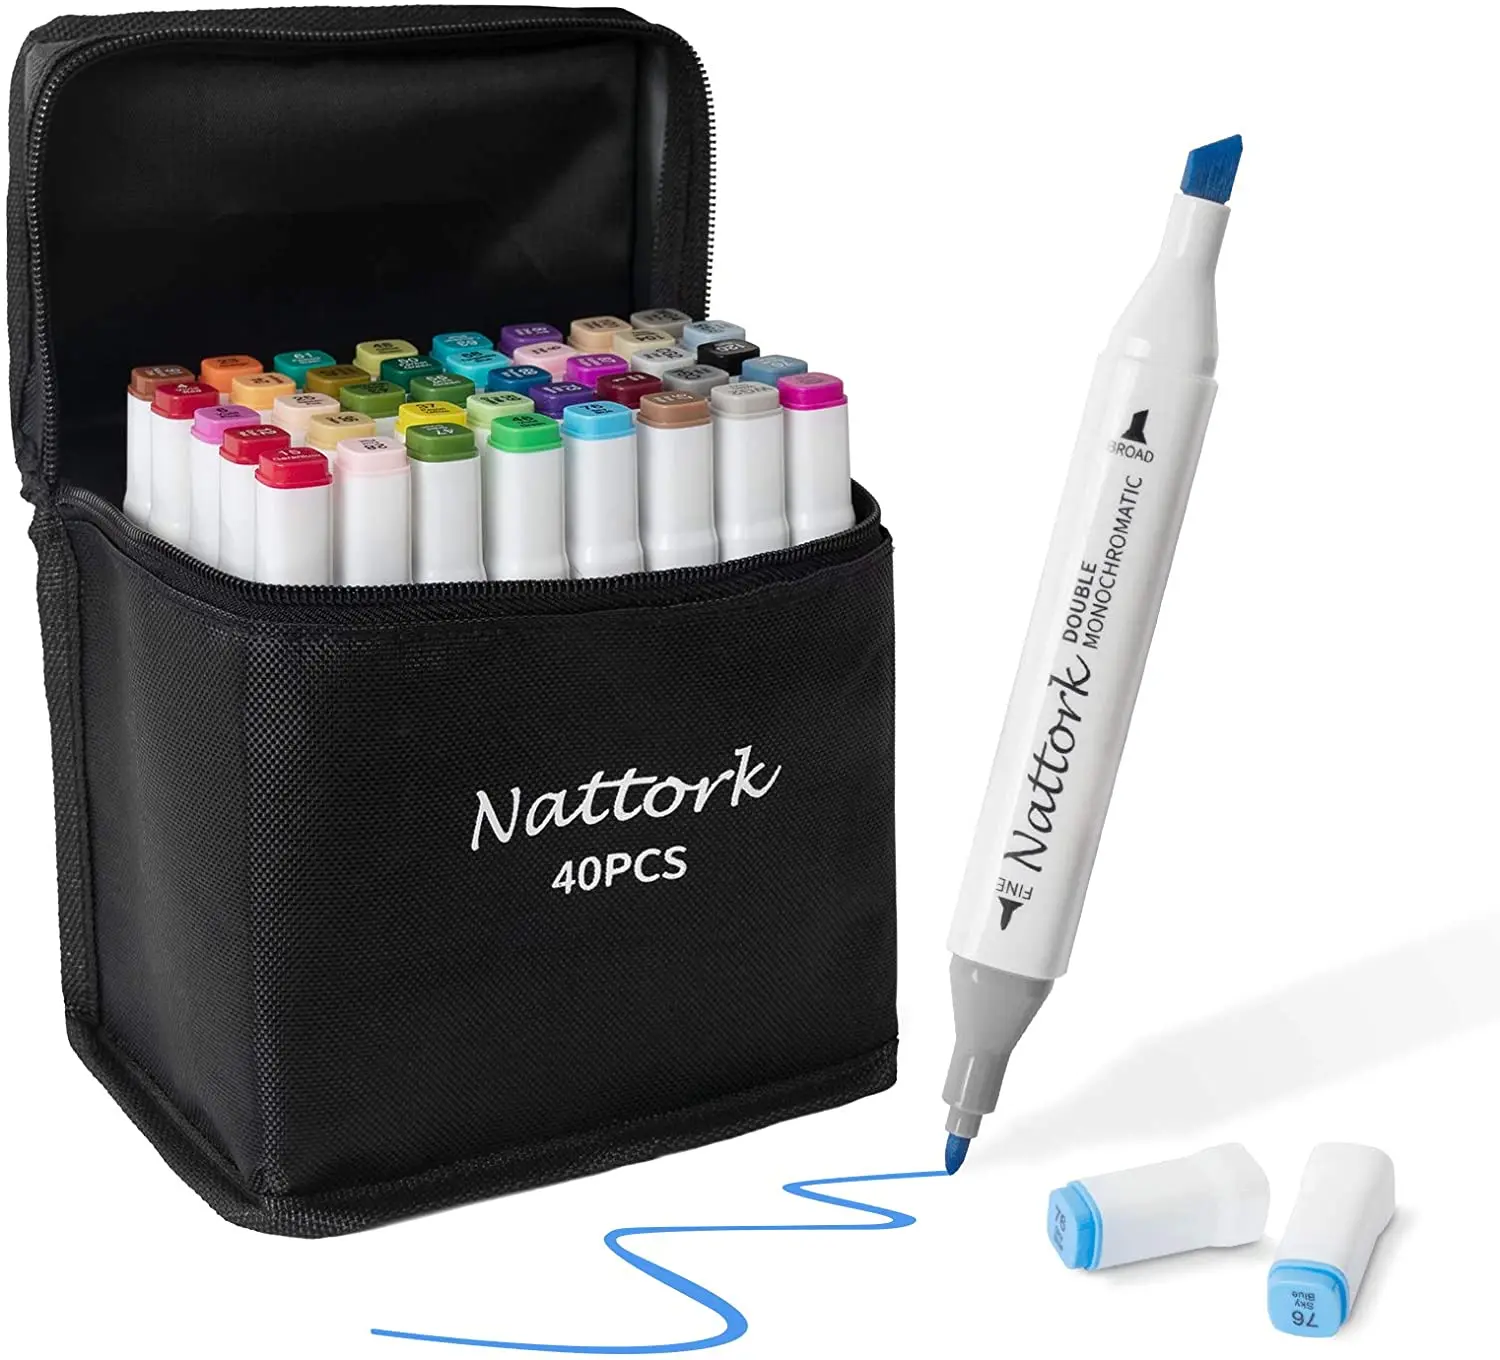 

Nattork Alcohol Markers,Color Dual Tip (Fine & Broad) Art MarkersComes w/ 1 Hook Line Pen, 1 Colorless Pen and Thick Packing